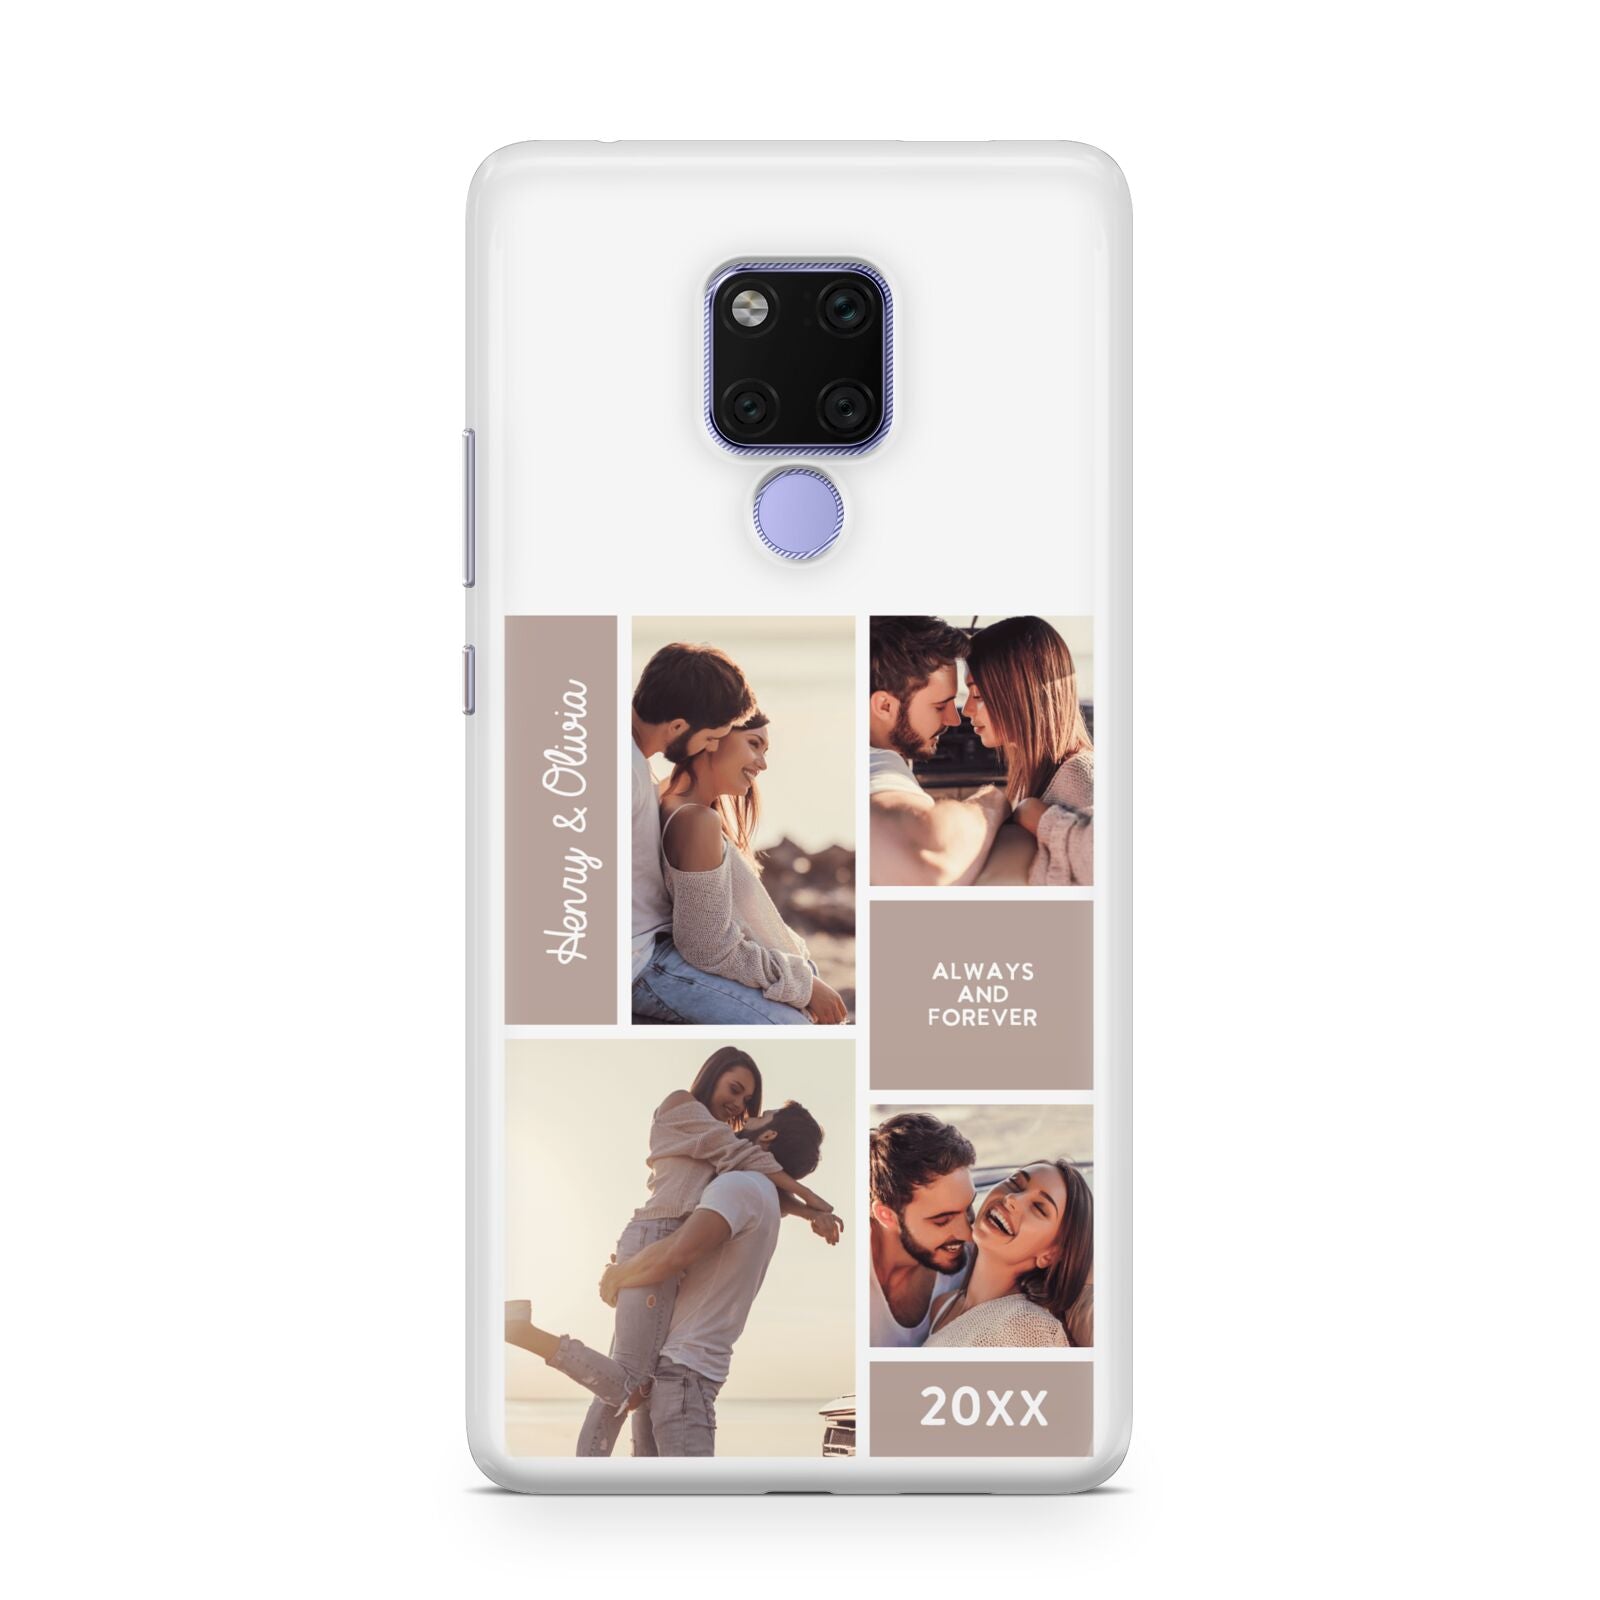 Couples Valentine Photo Collage Personalised Huawei Mate 20X Phone Case